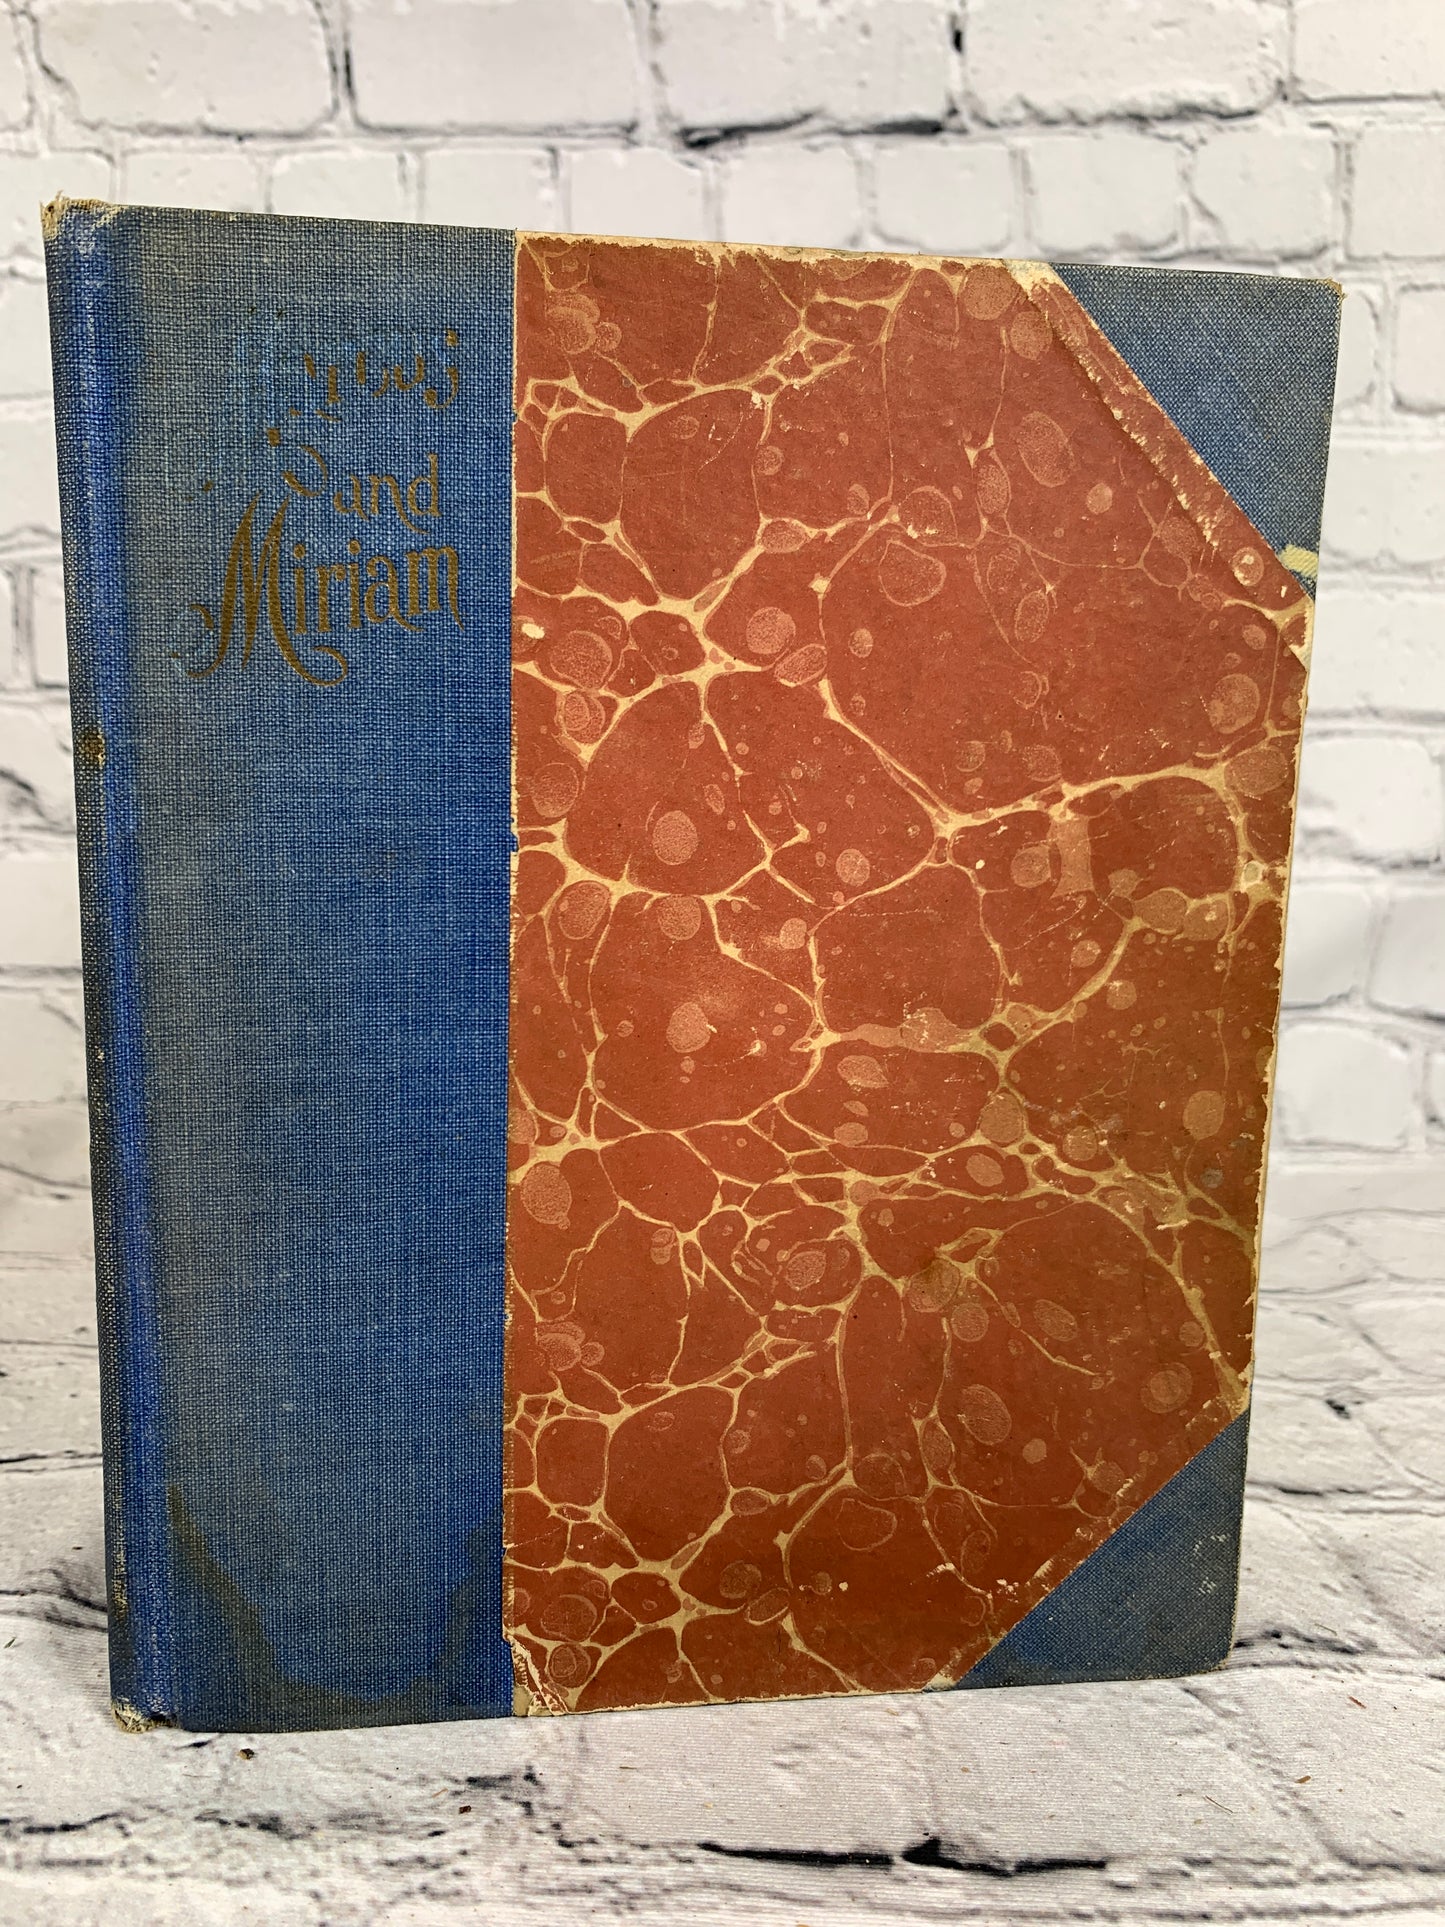 Marcus and Miriam A Story of Jesus by Rebecca Ruter Springer [1st Edition · 1908]